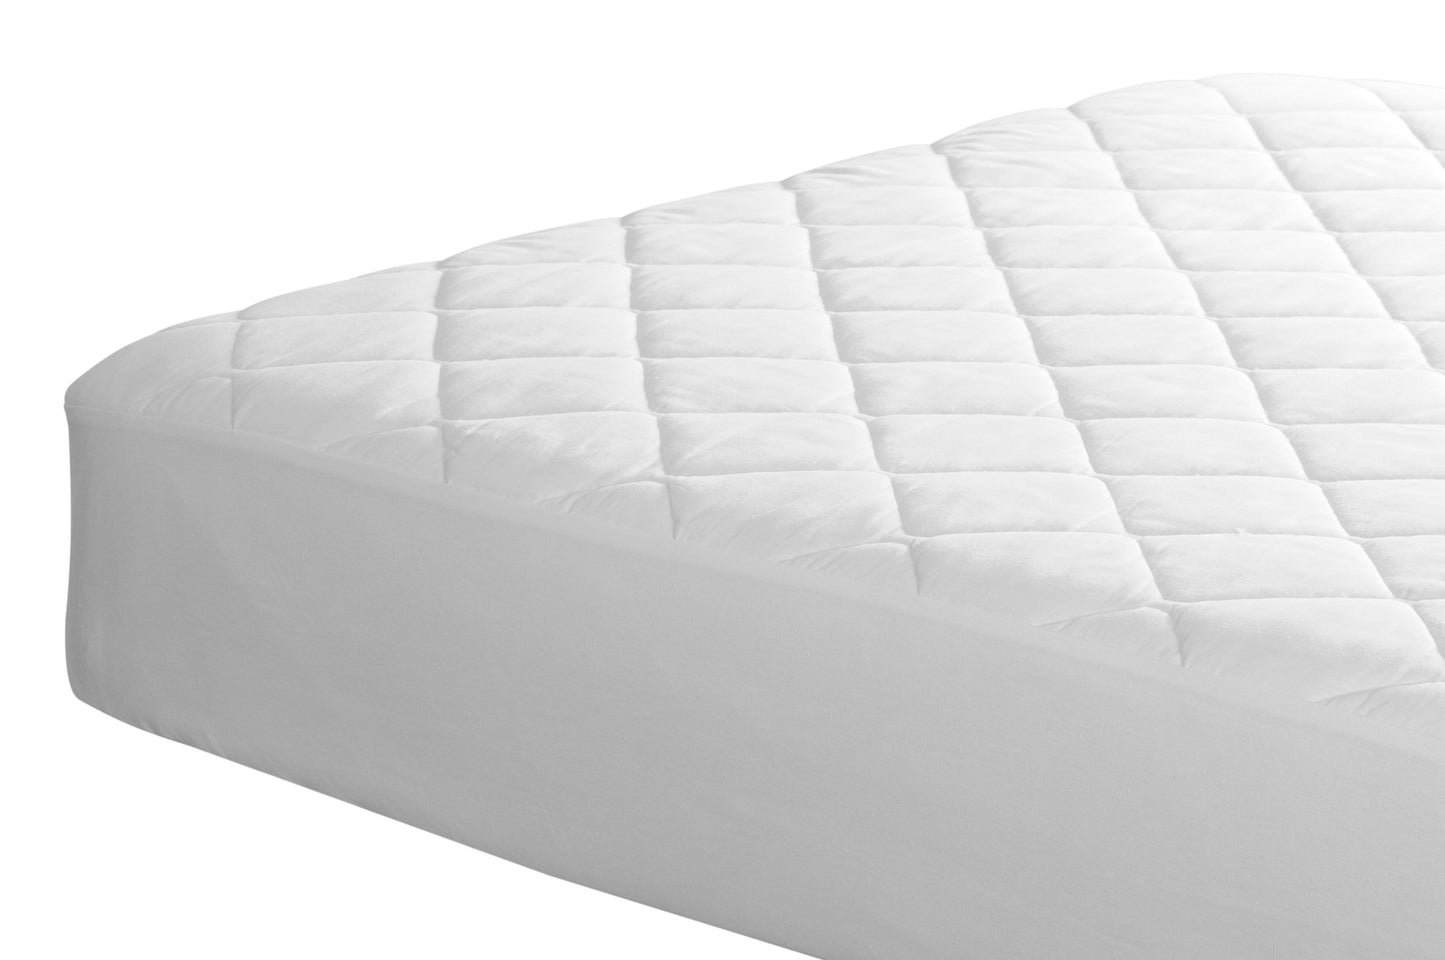 Quilted Mattress Protector OLIVIA ROCCO Mattress Protector